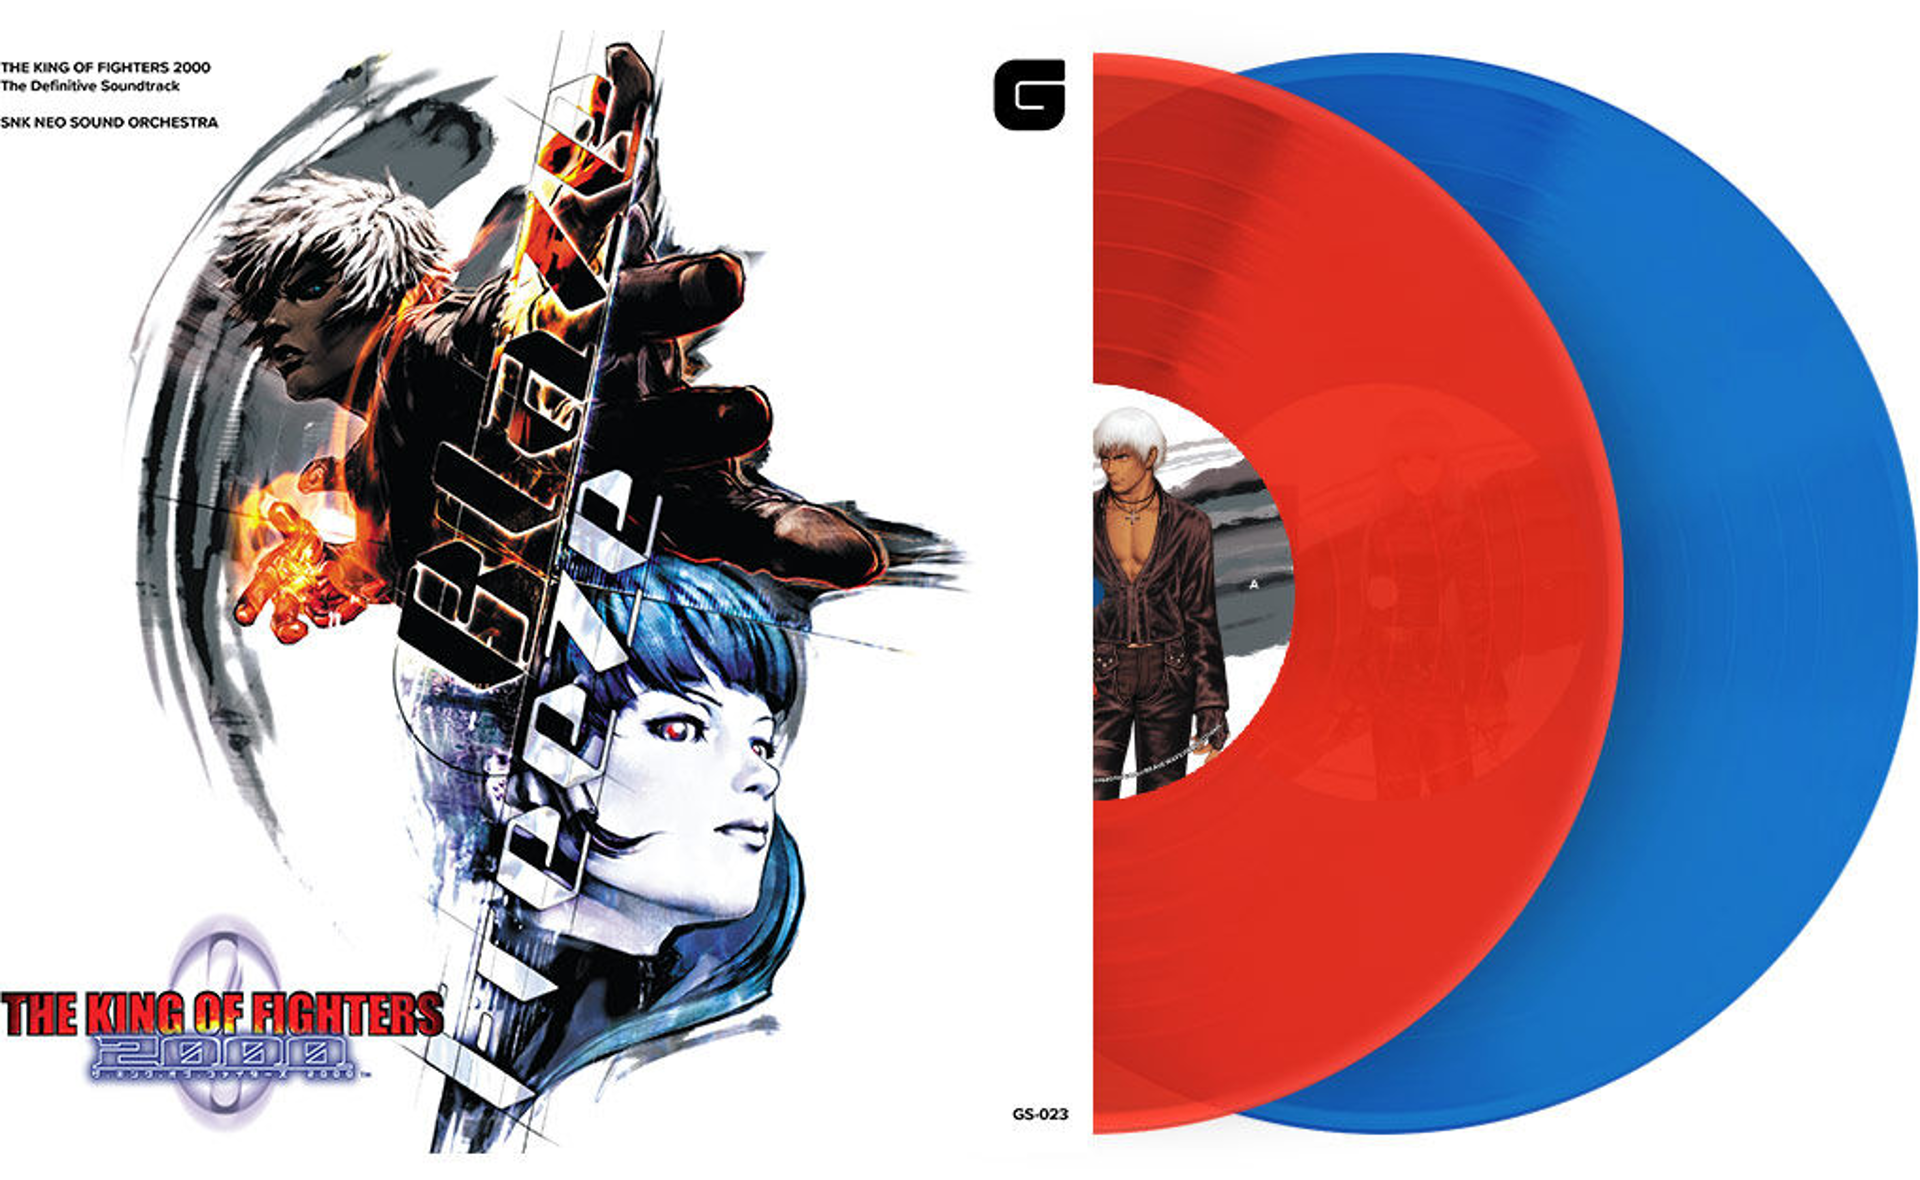 The King of Fighters 2000 - The Definitive Soundtrack - 2-LP Red & Blue Vinyl